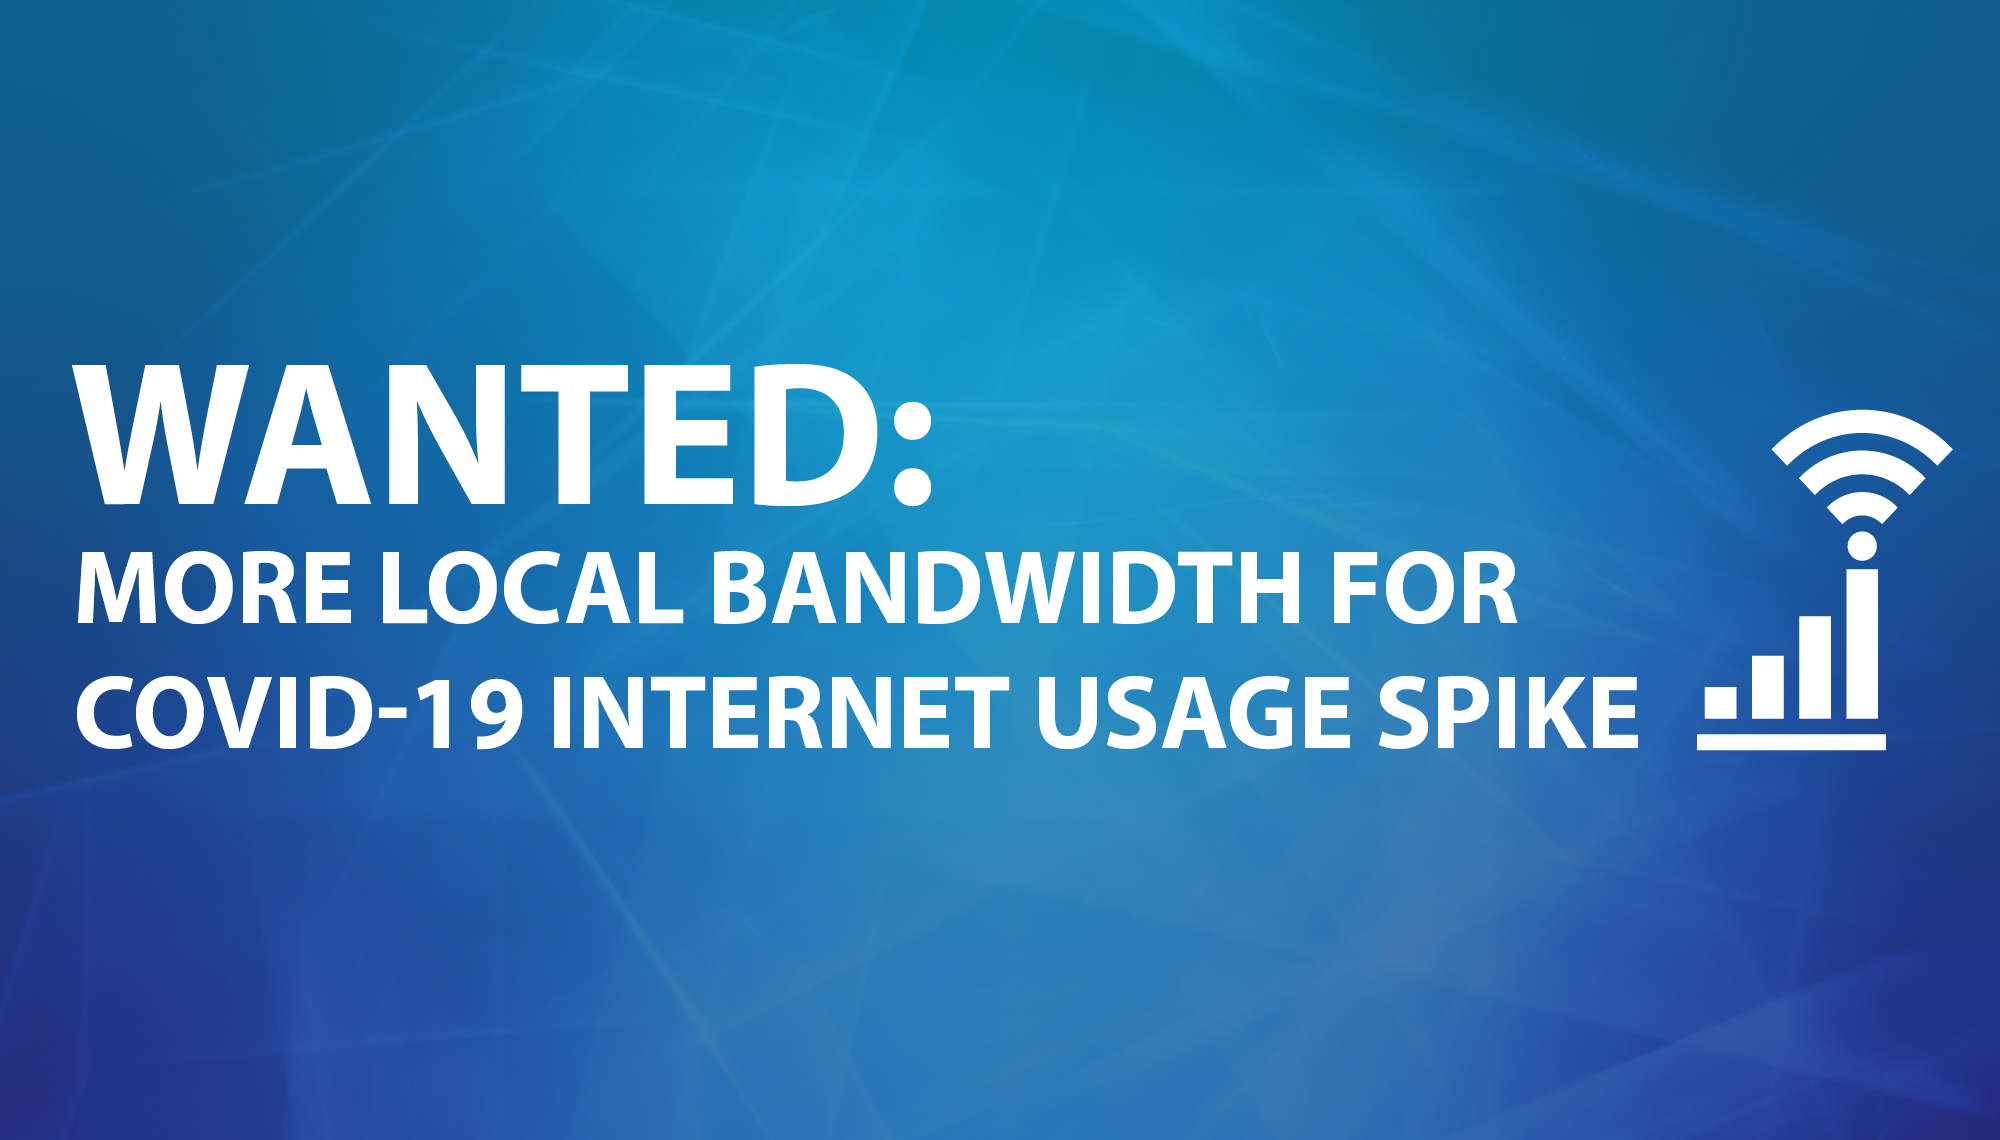 Wanted: More Local Bandwidth for COVID-19 Internet Usage Spike